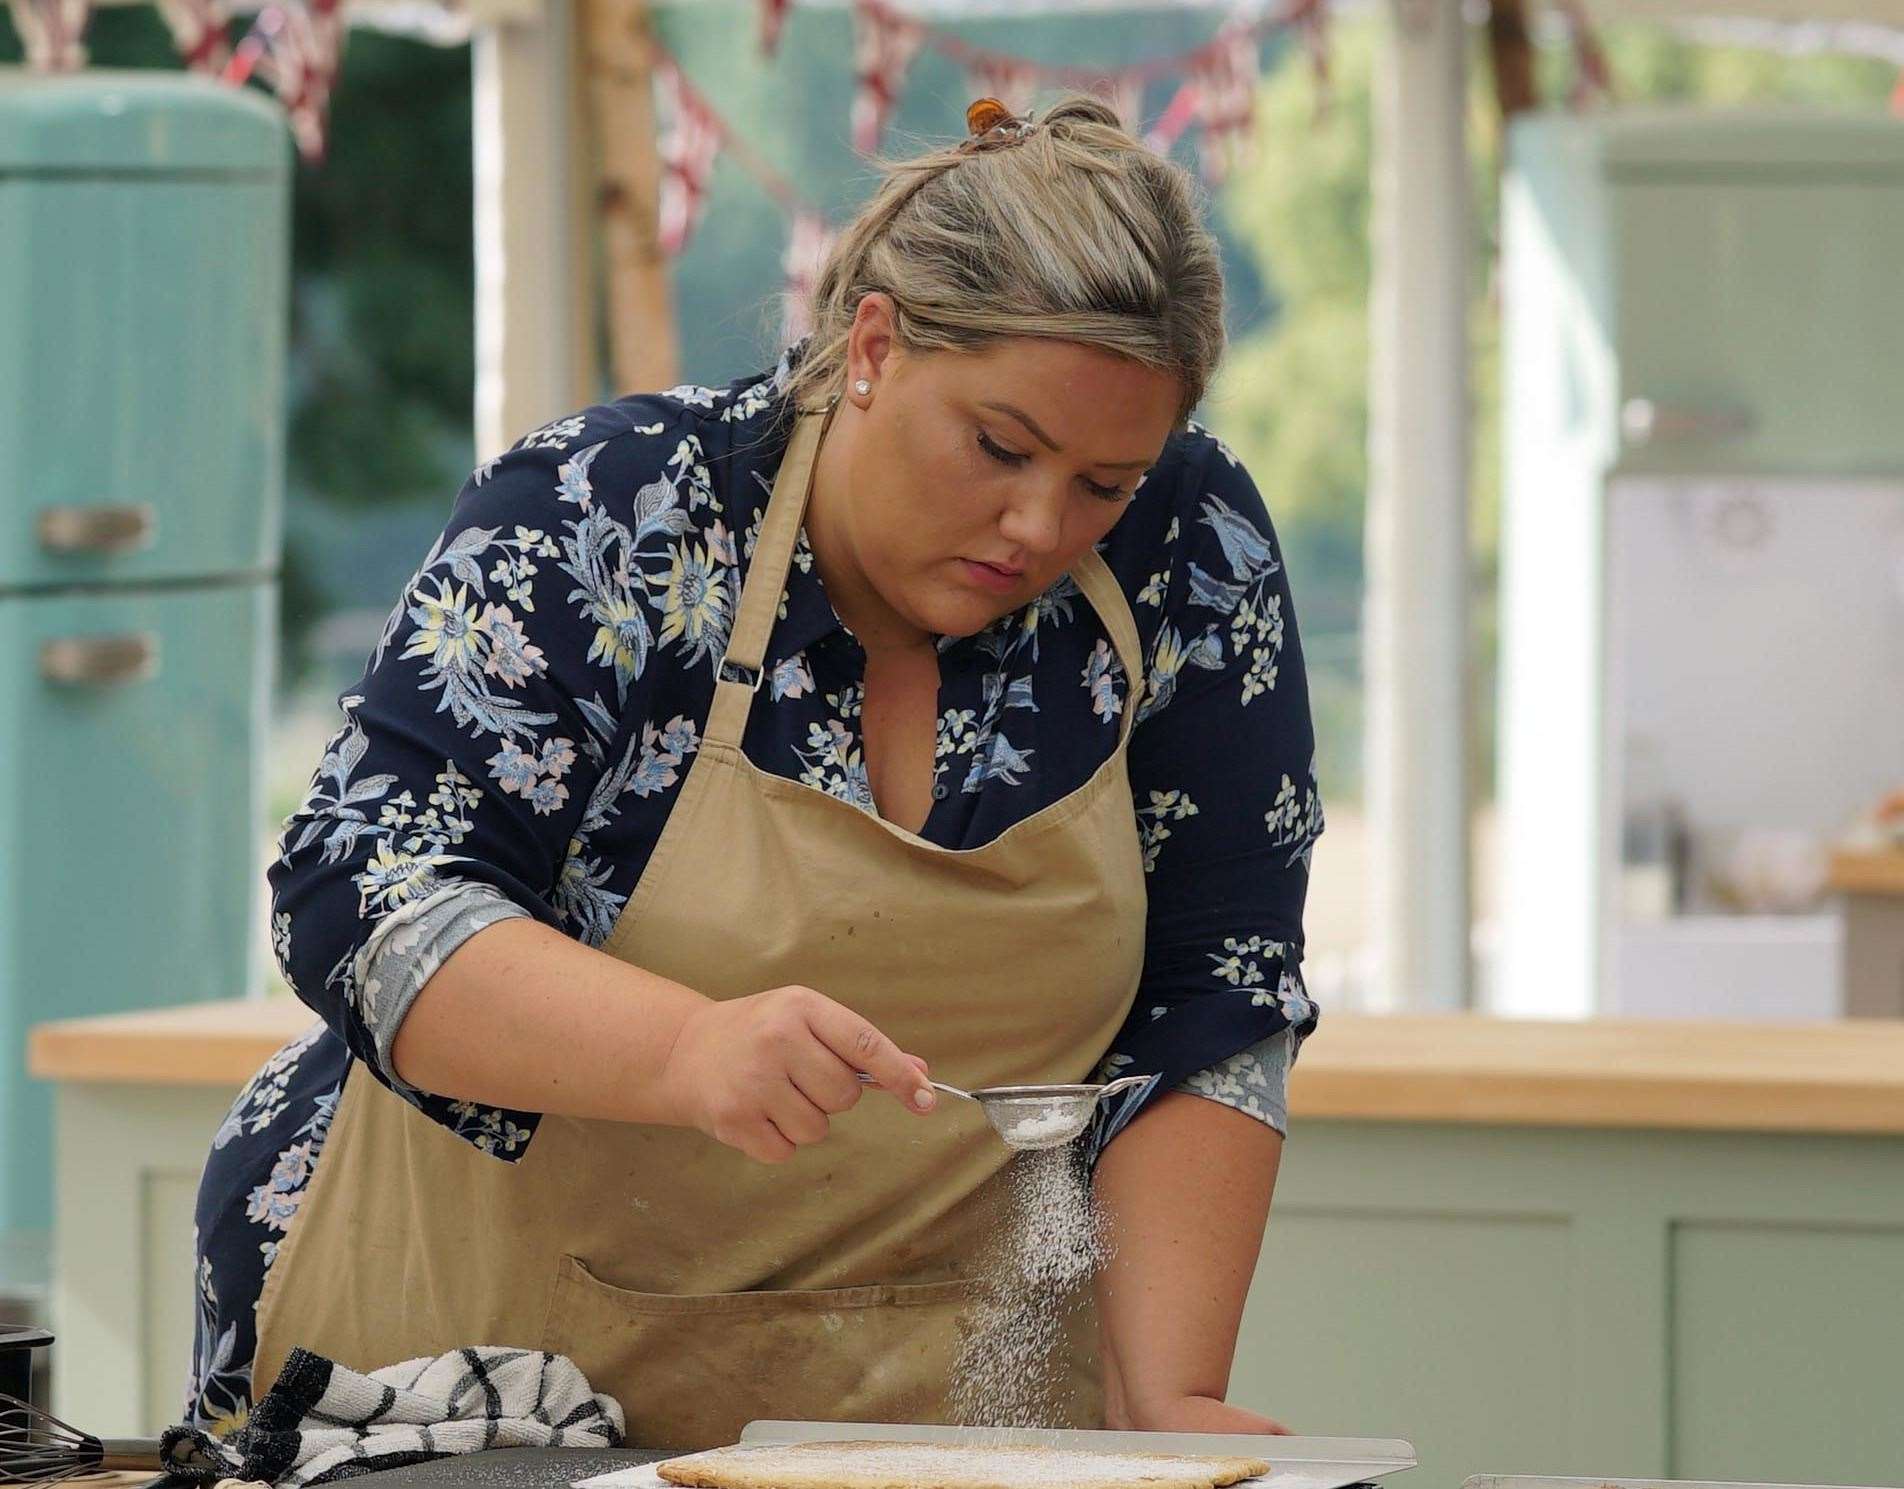 Laura Adlington, who was born in Gravesend, made the Great British Bake Off 2020 final. Picture Channel 4